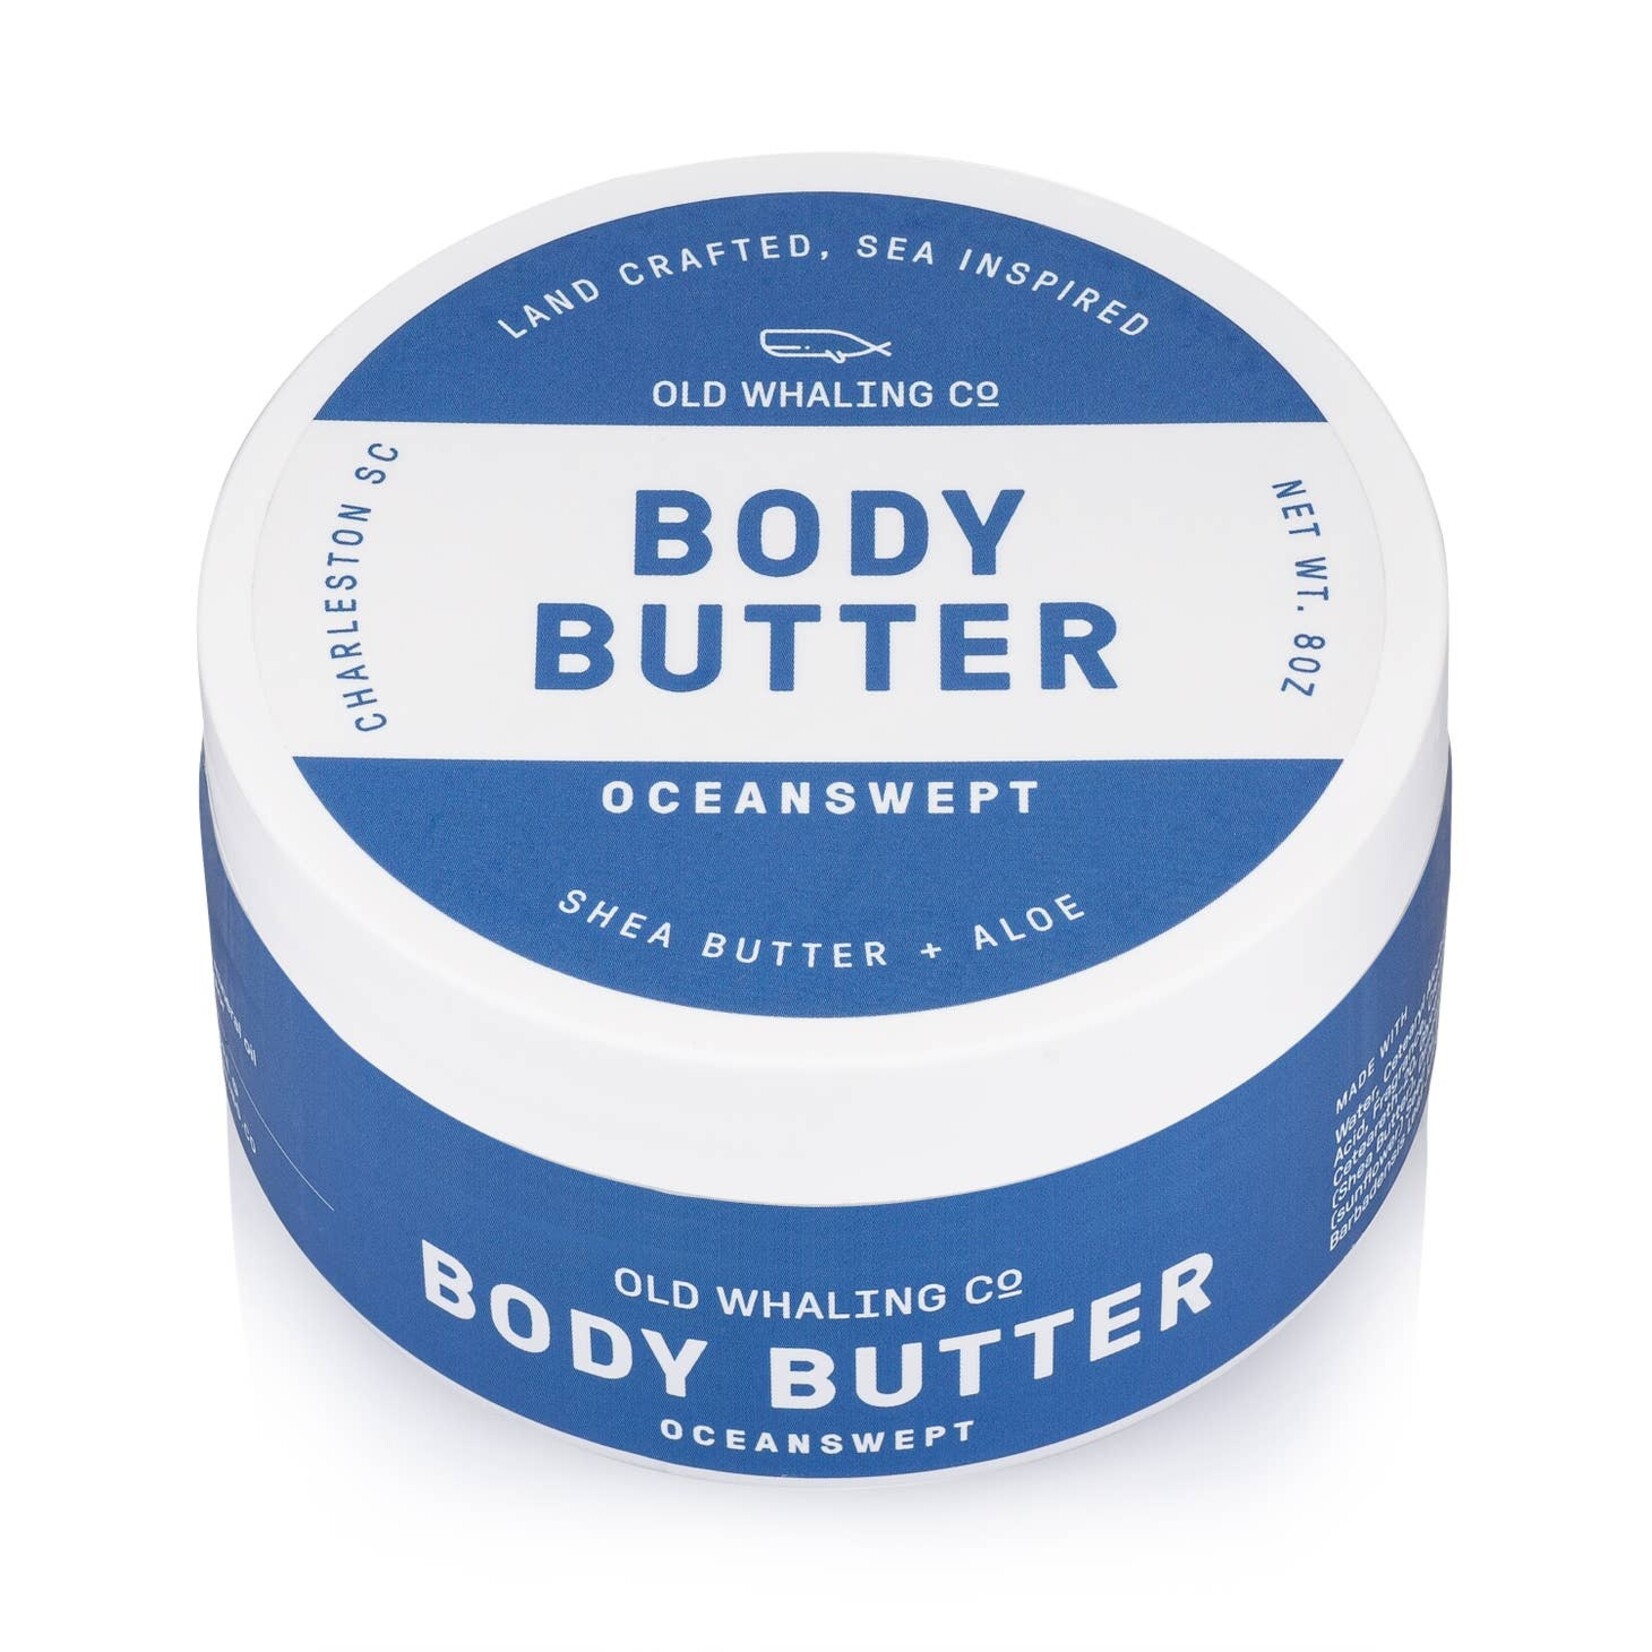 Old Whaling Company Oceanswept Body Butter (8oz)